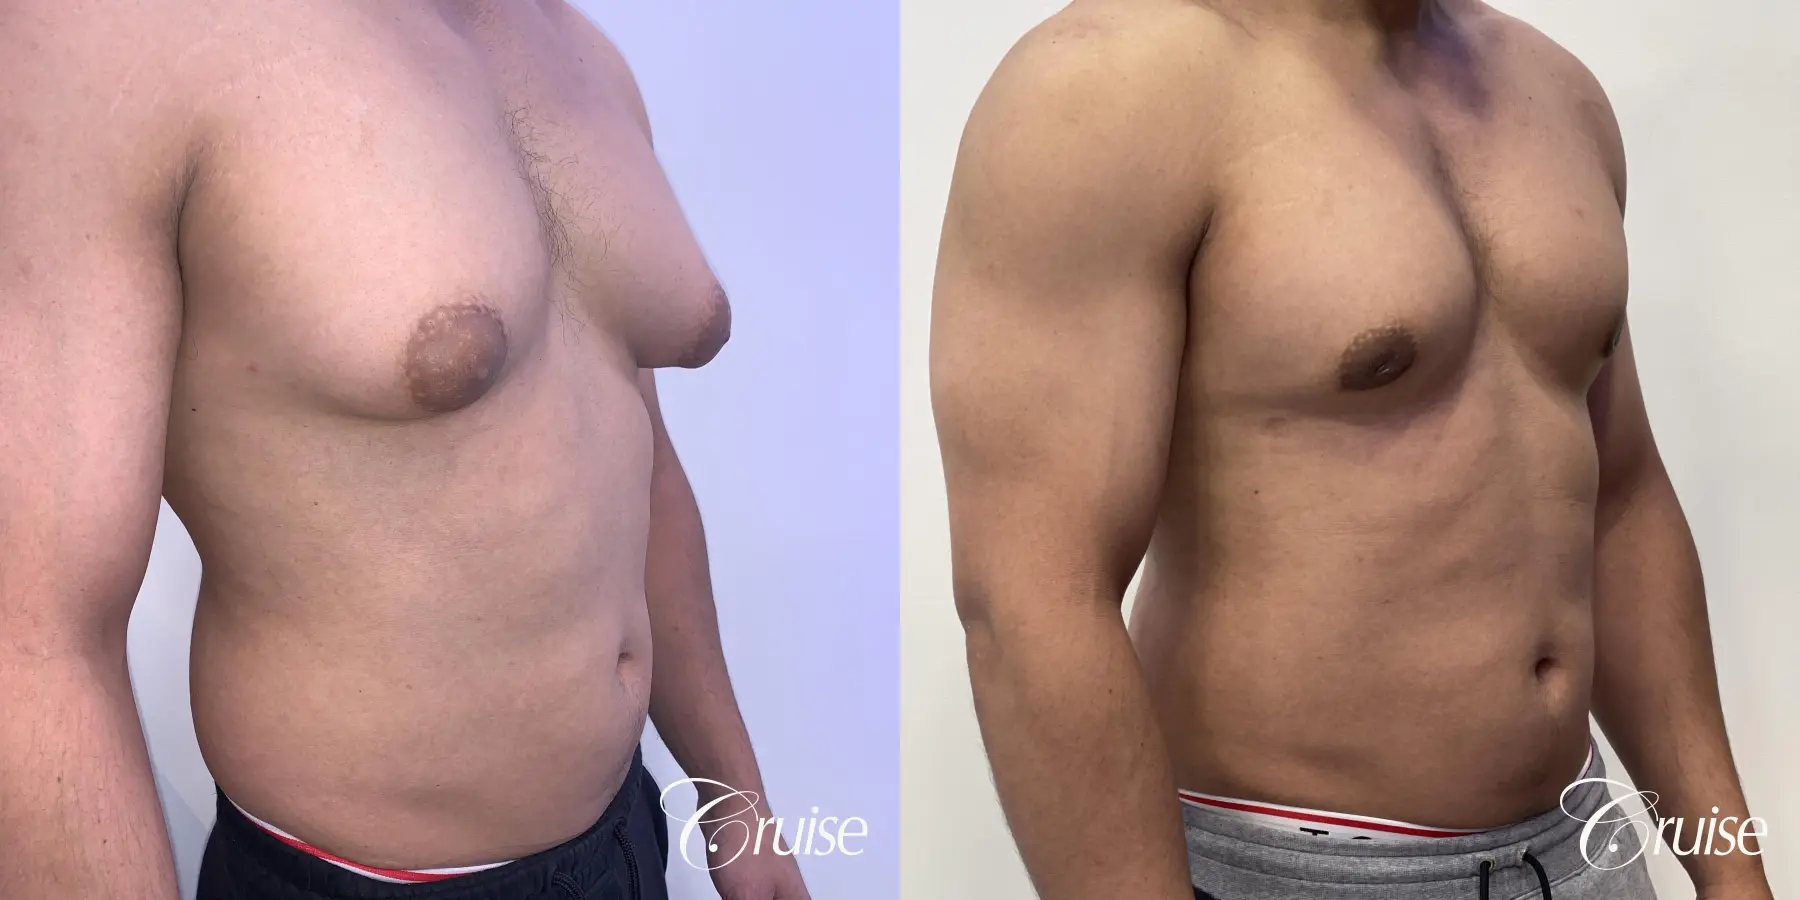 gynecomastia surgery - Before and After 5